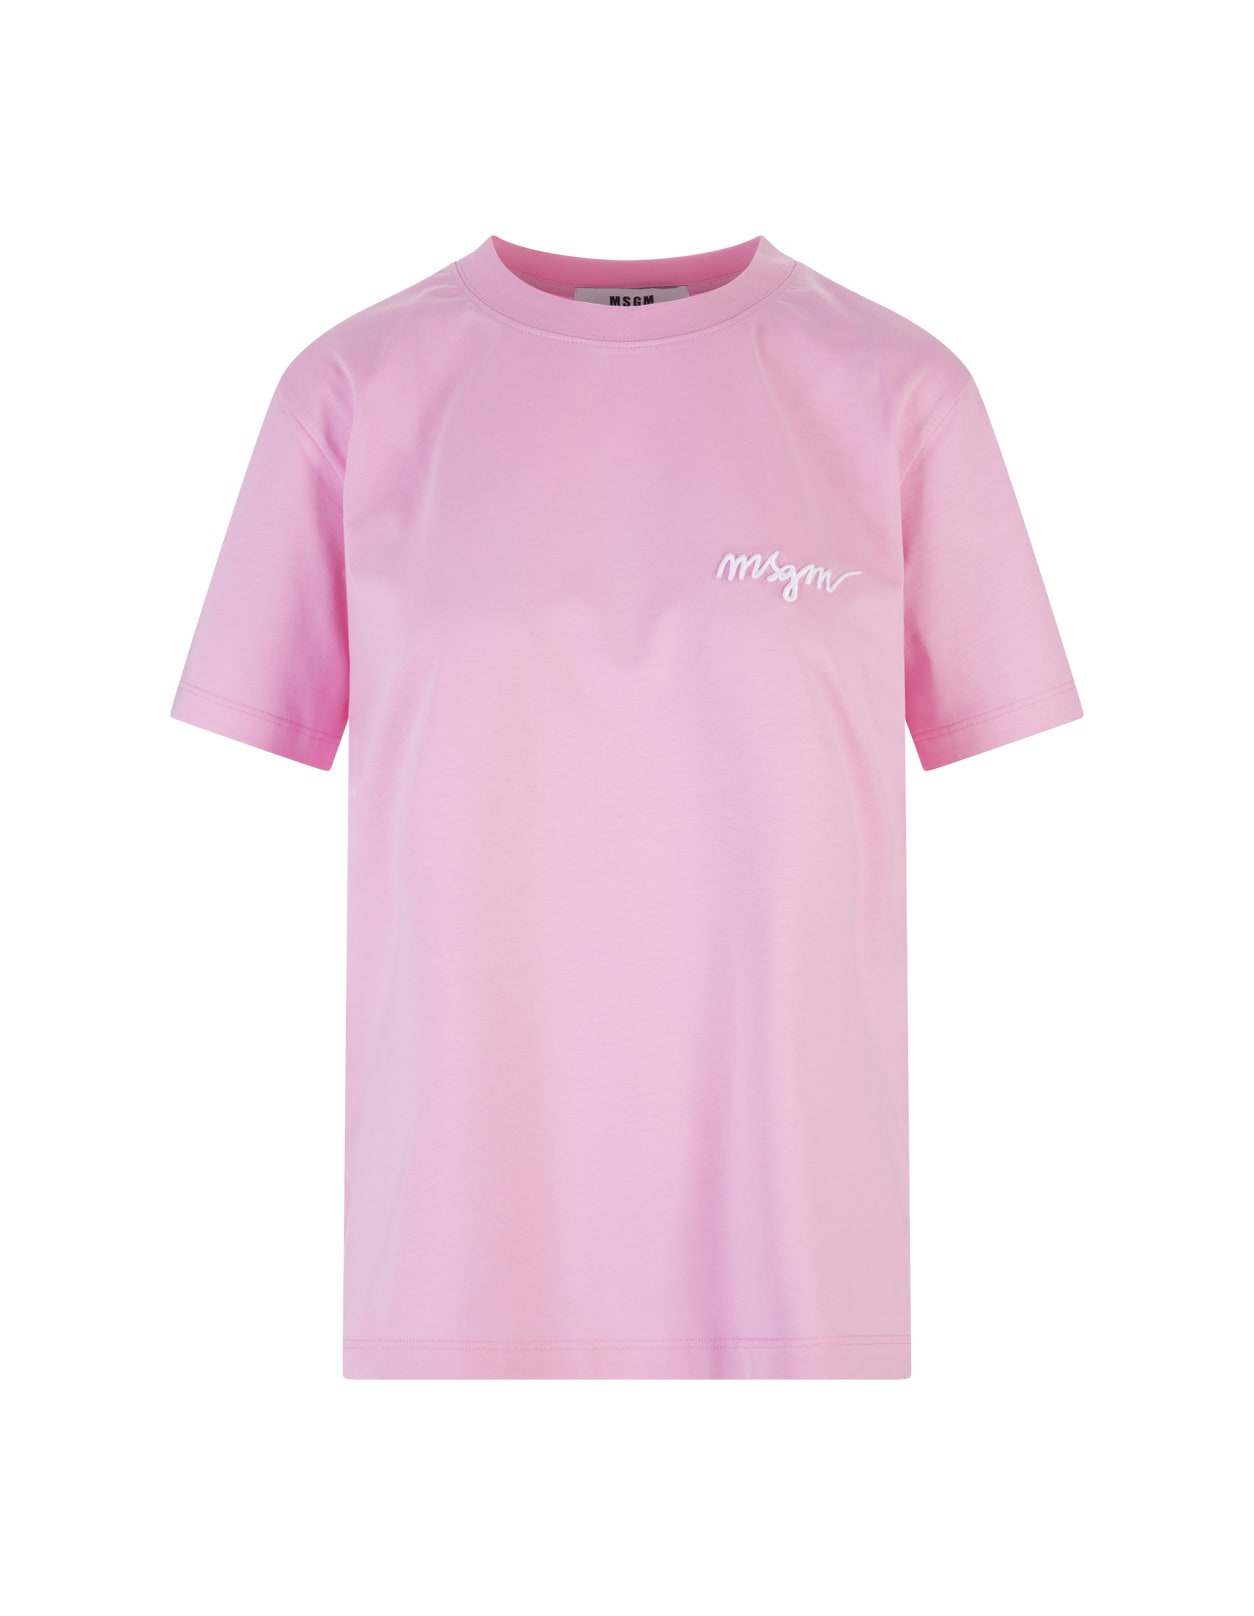 Woman Pink T-shirt With White Msgm Signature